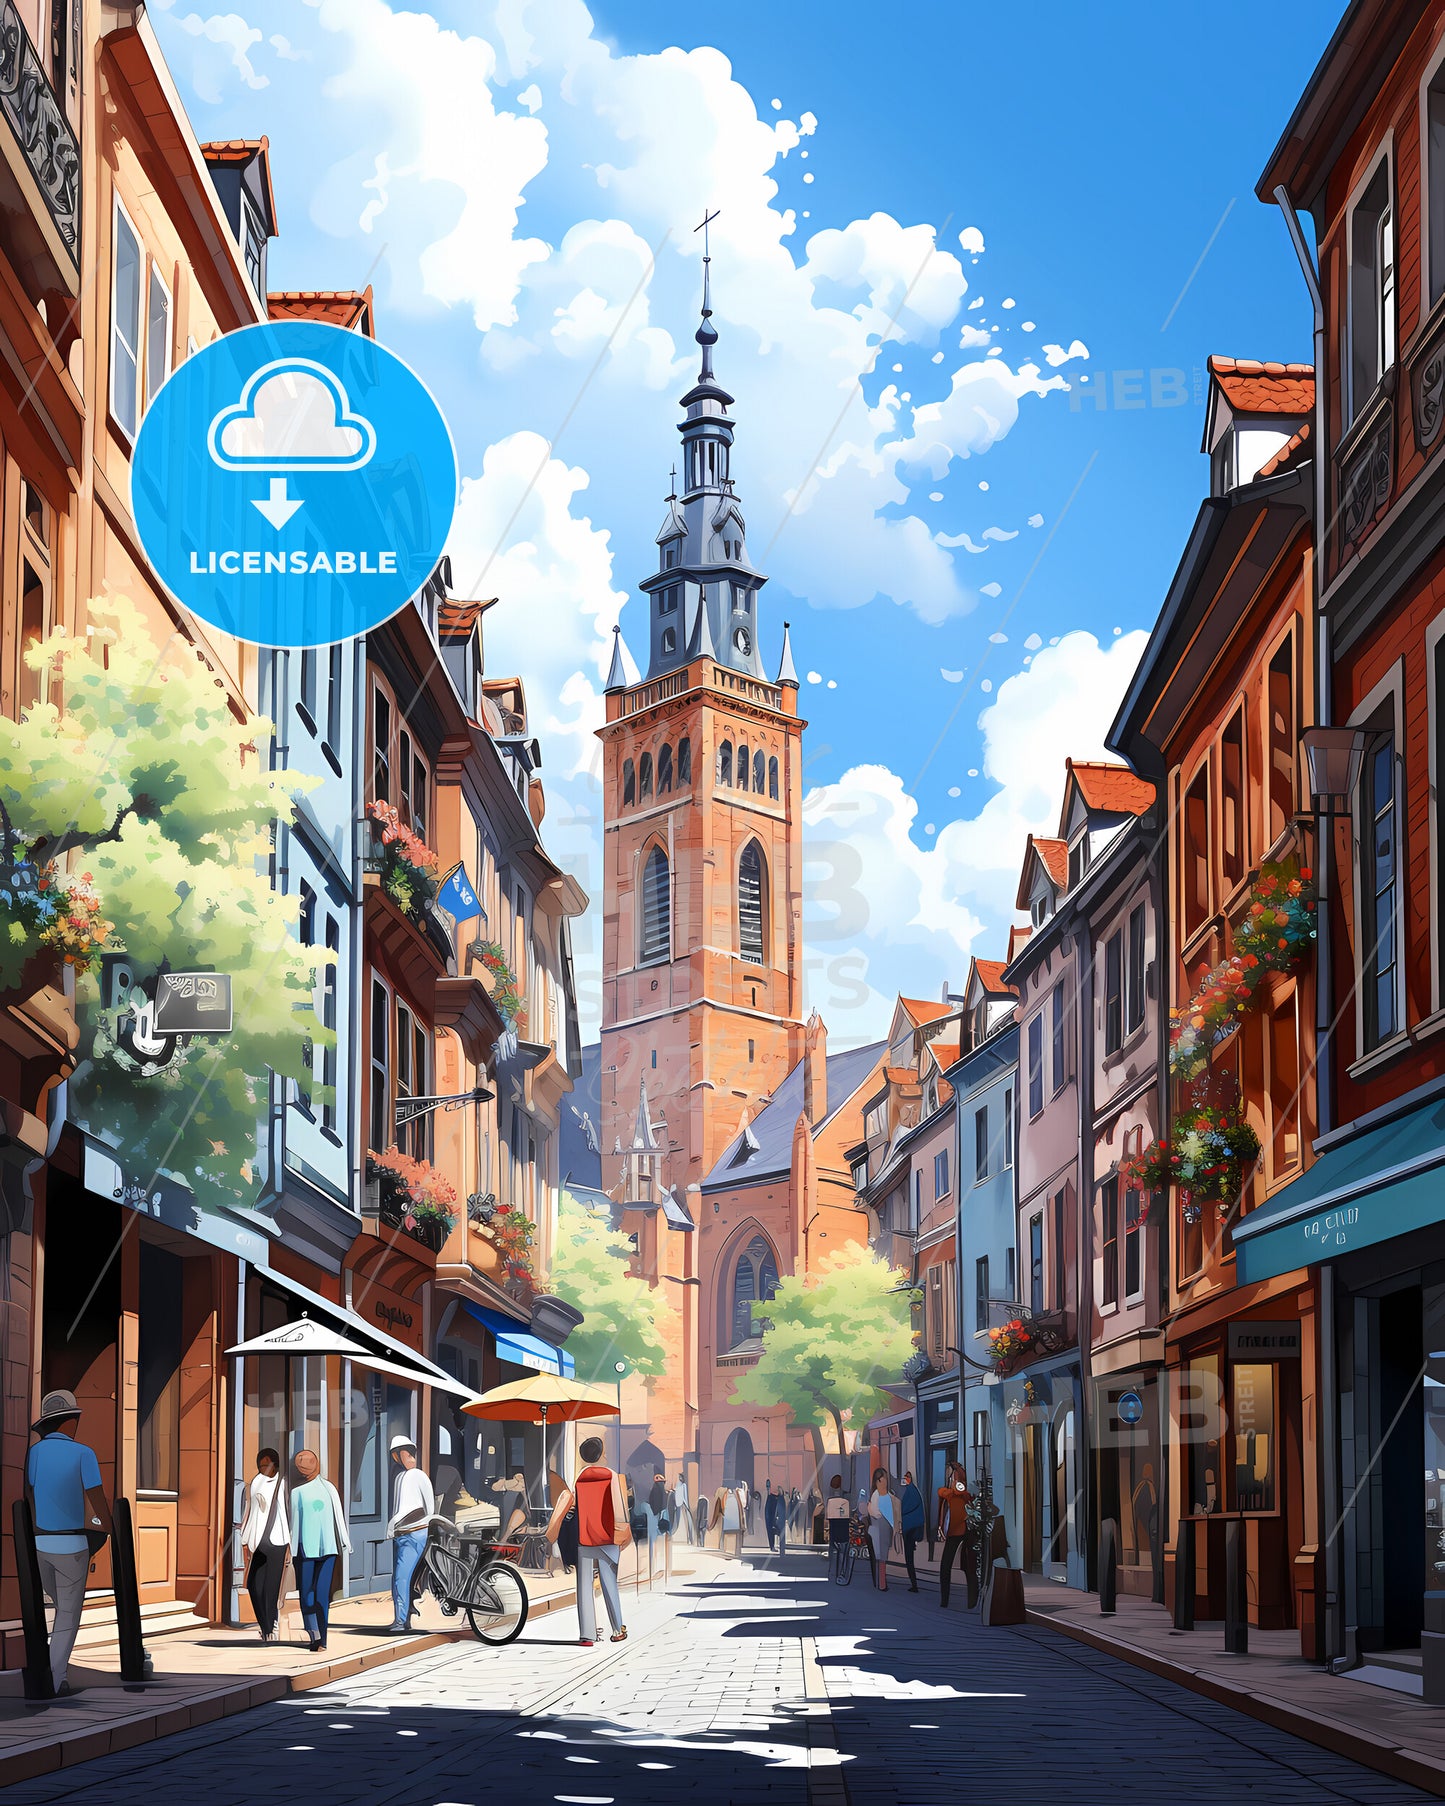 Toulouse, France - A Street With Buildings And People Walking And A Tower